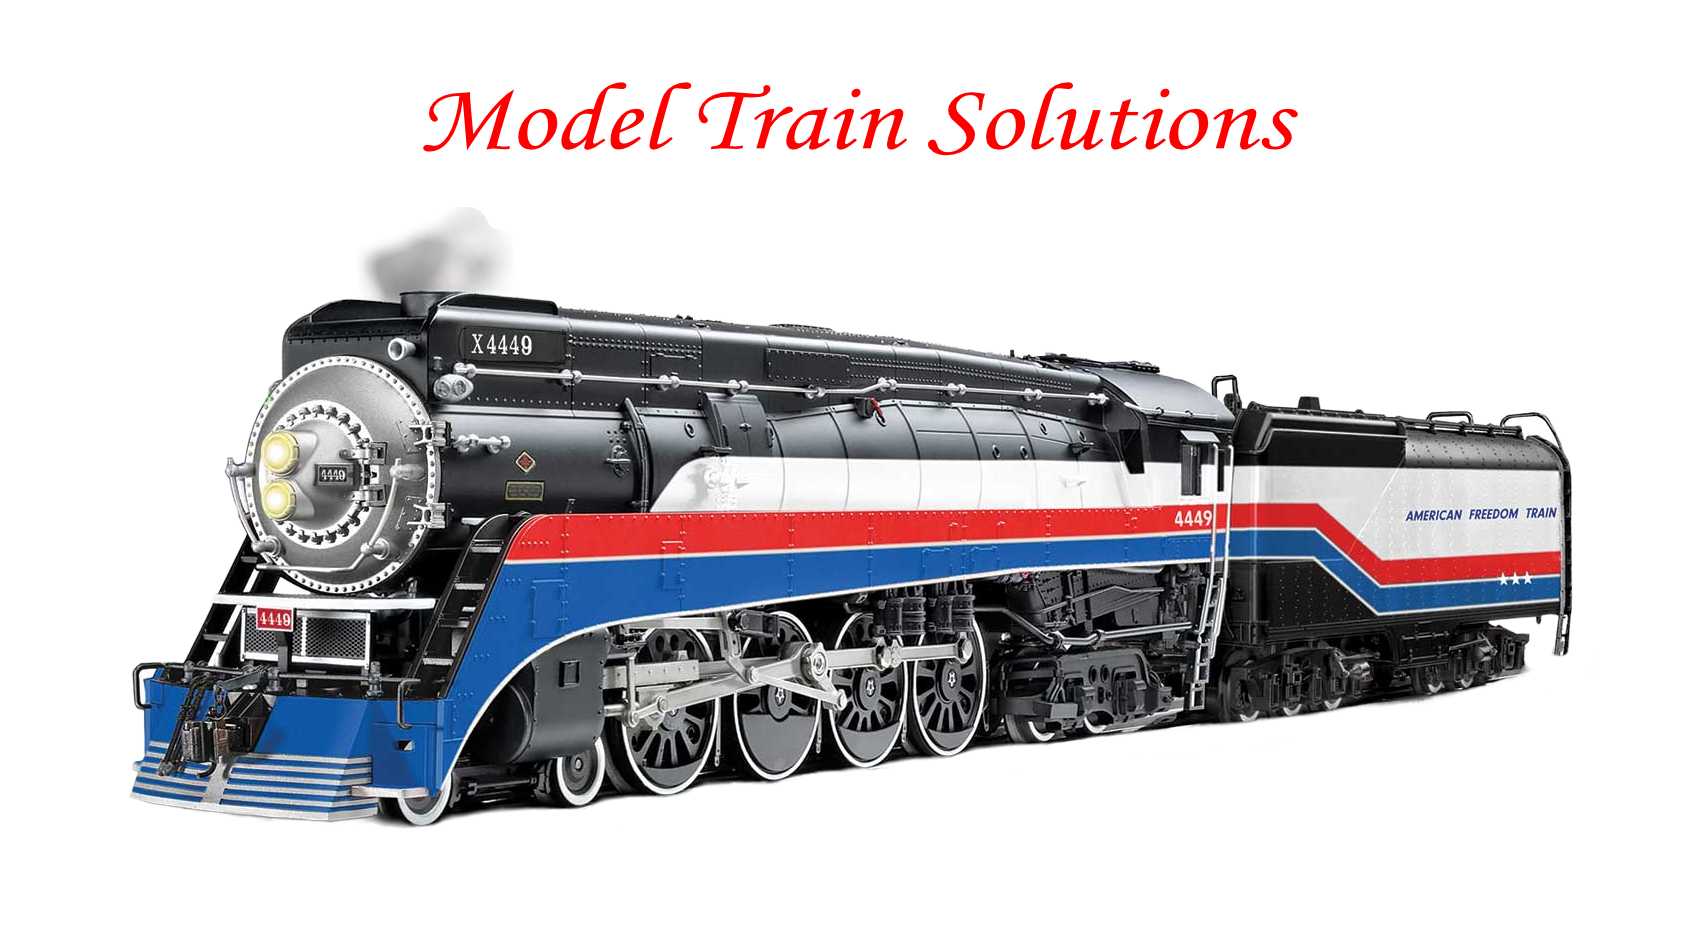 Model Train Solutions Locomotive with title1